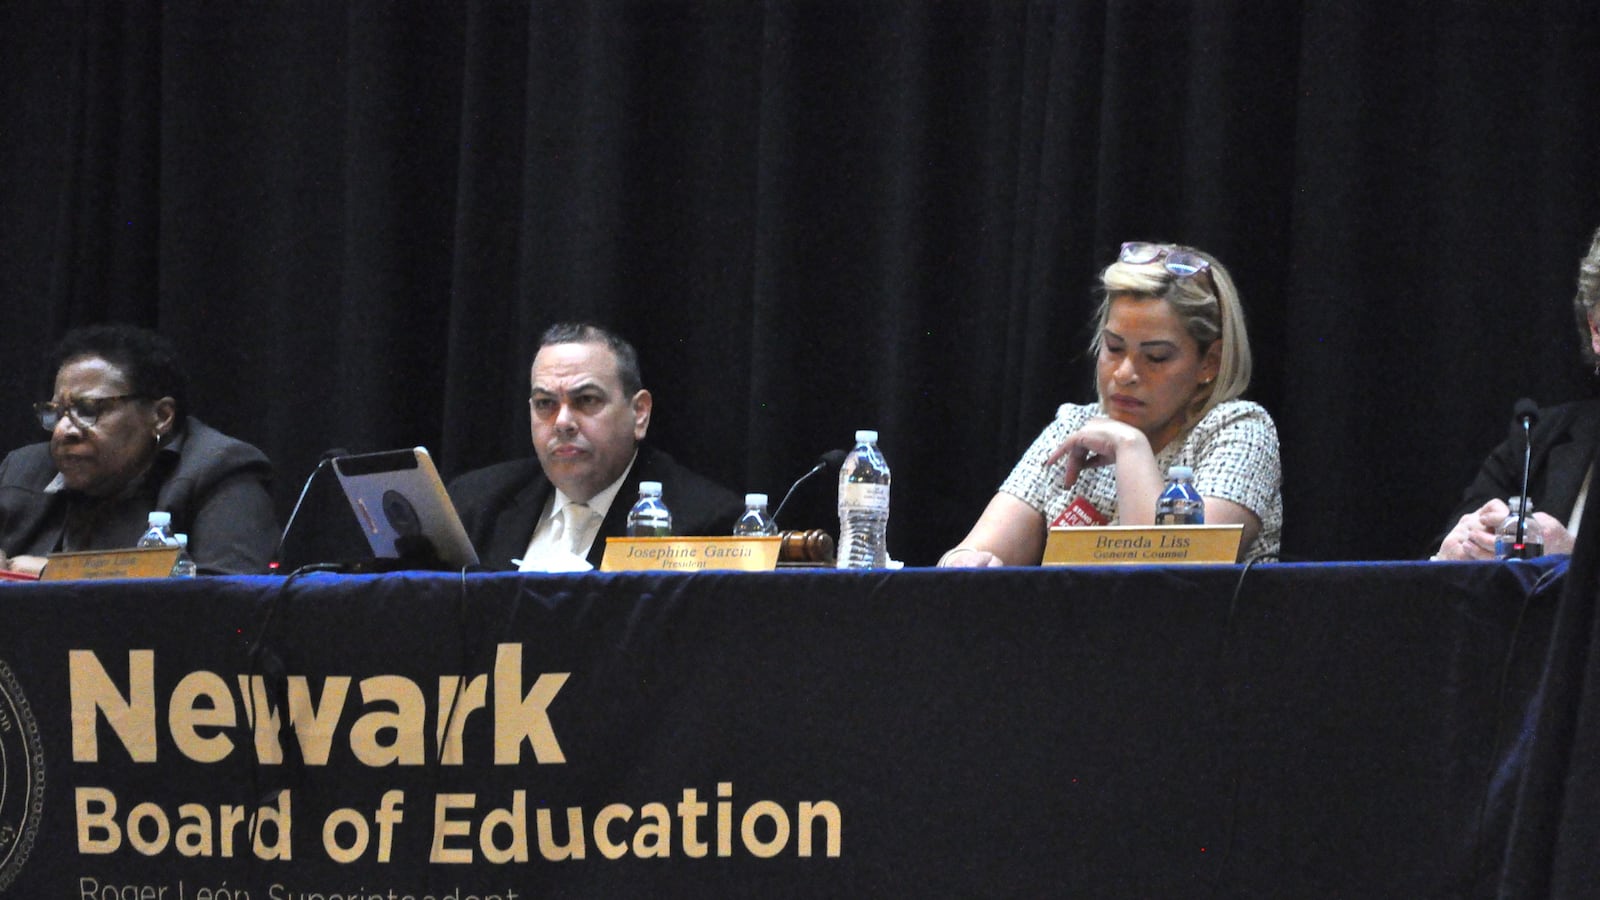 Newark Superintendent Roger León listened as charter school advocates and critics voiced their opinions at the board meeting.